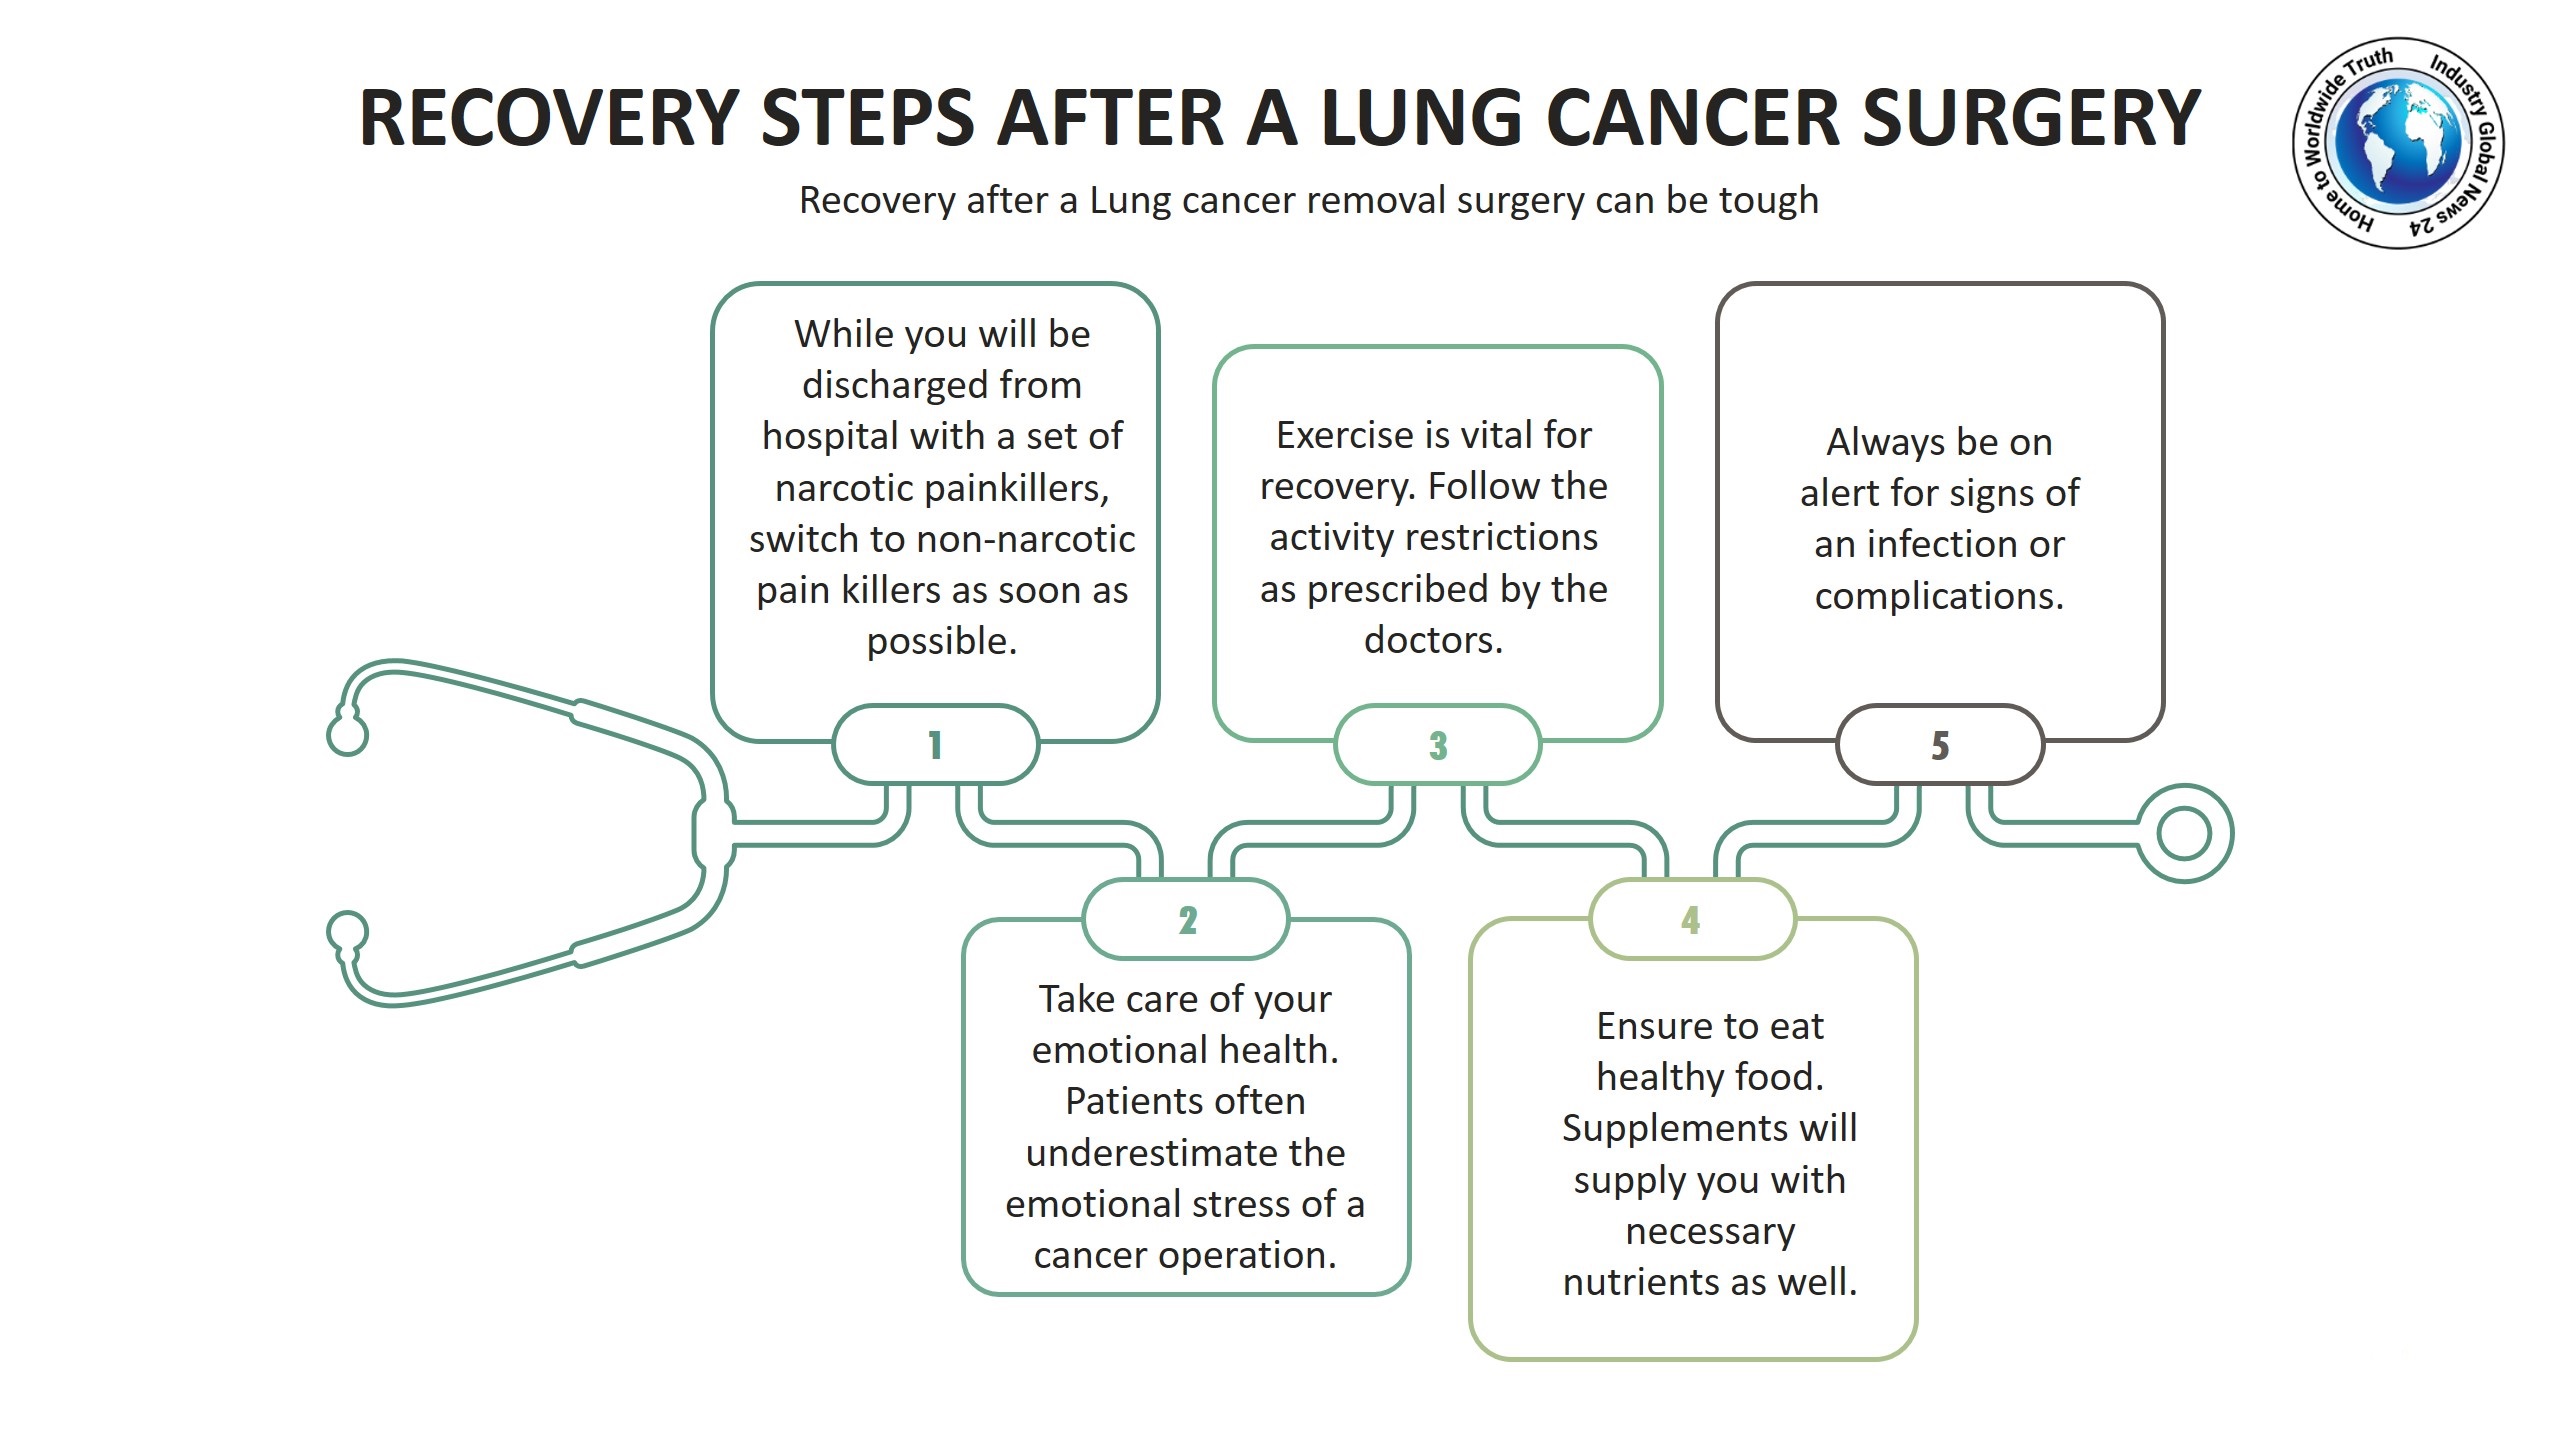 Recovery steps after a lung cancer surgery